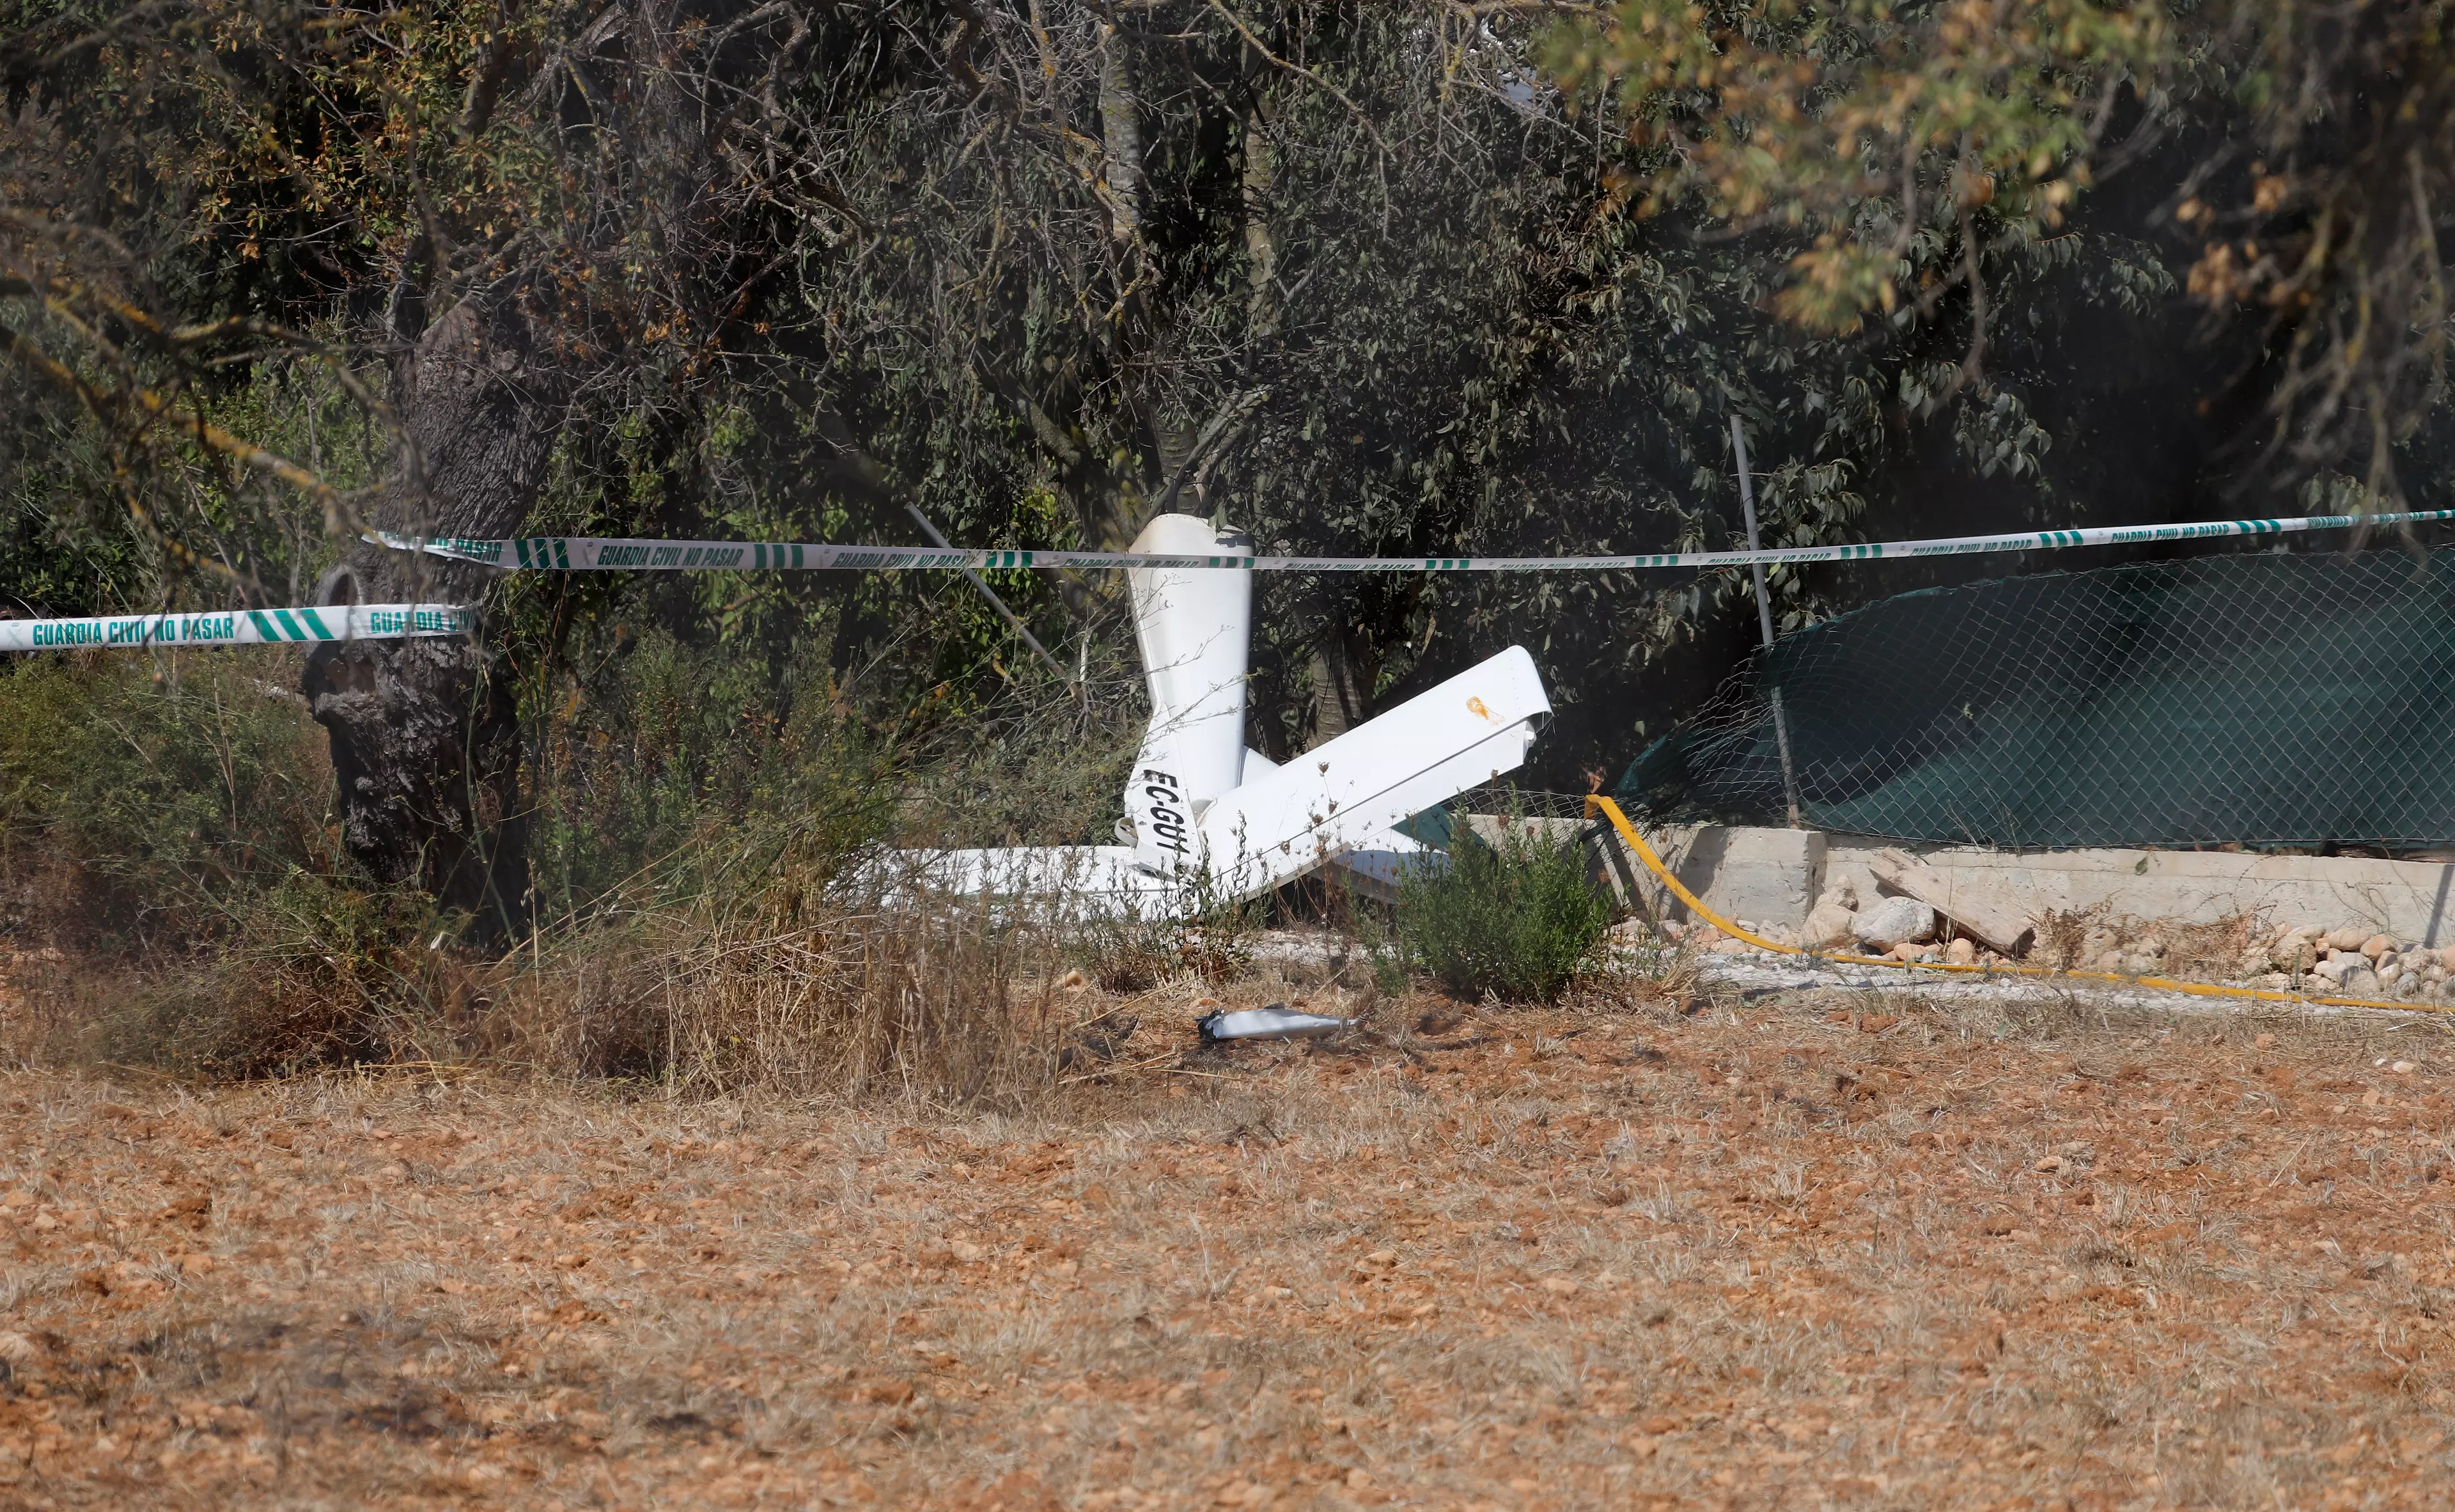 Wreckage from the collision between a helicopter and microlight plane was found in Inca, Majorca.